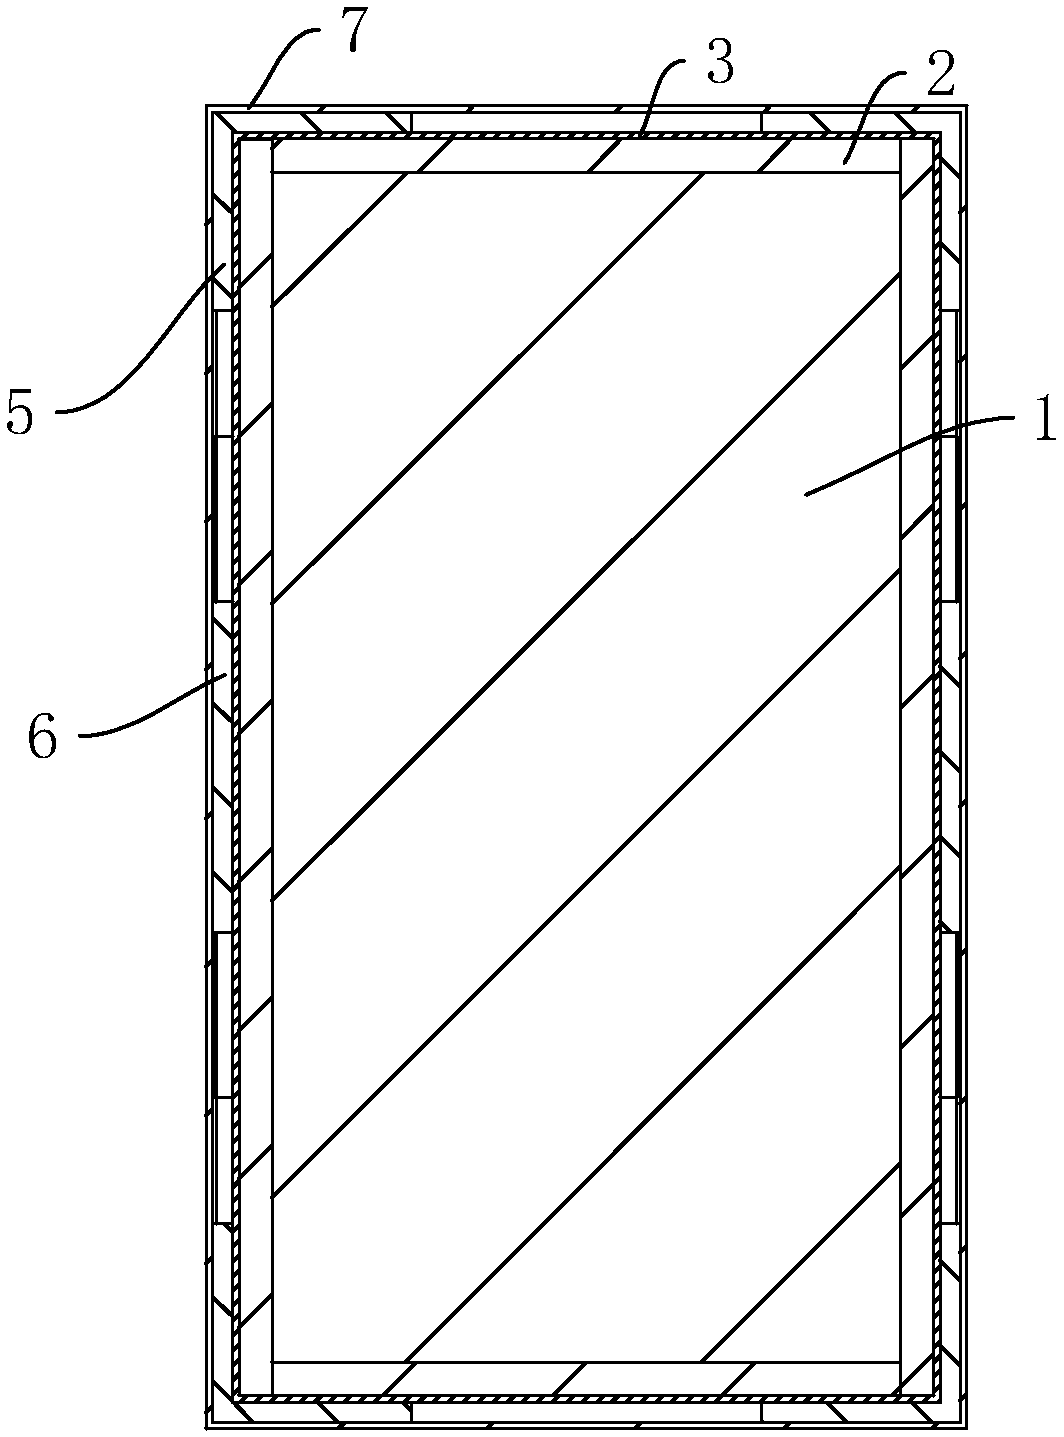 Large-size glass packaging method